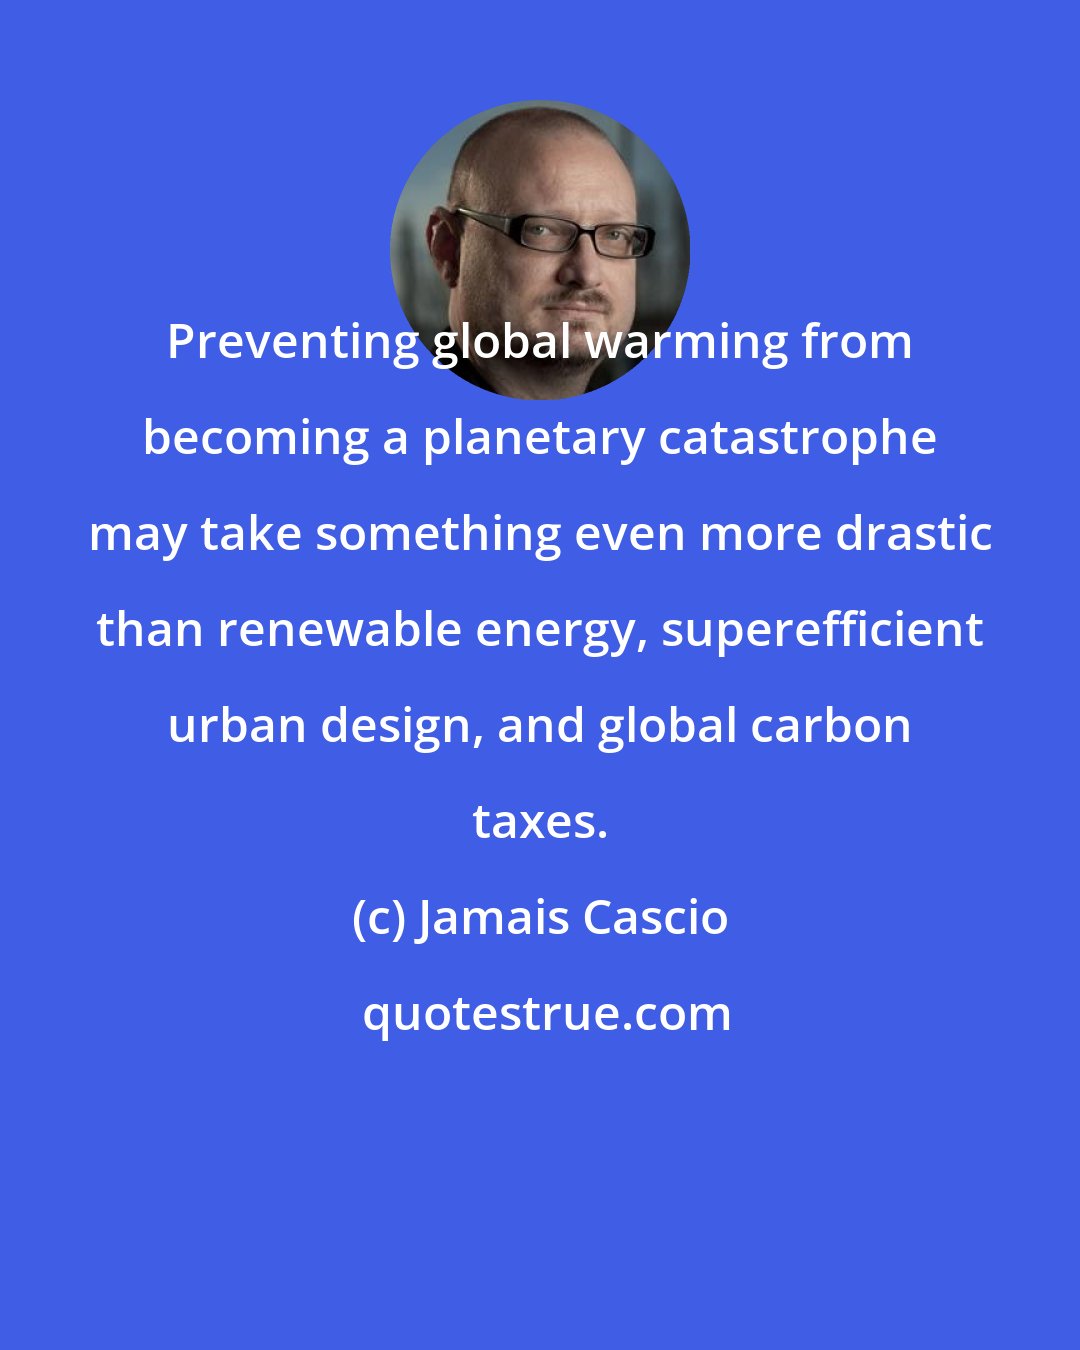 Jamais Cascio: Preventing global warming from becoming a planetary catastrophe may take something even more drastic than renewable energy, superefficient urban design, and global carbon taxes.